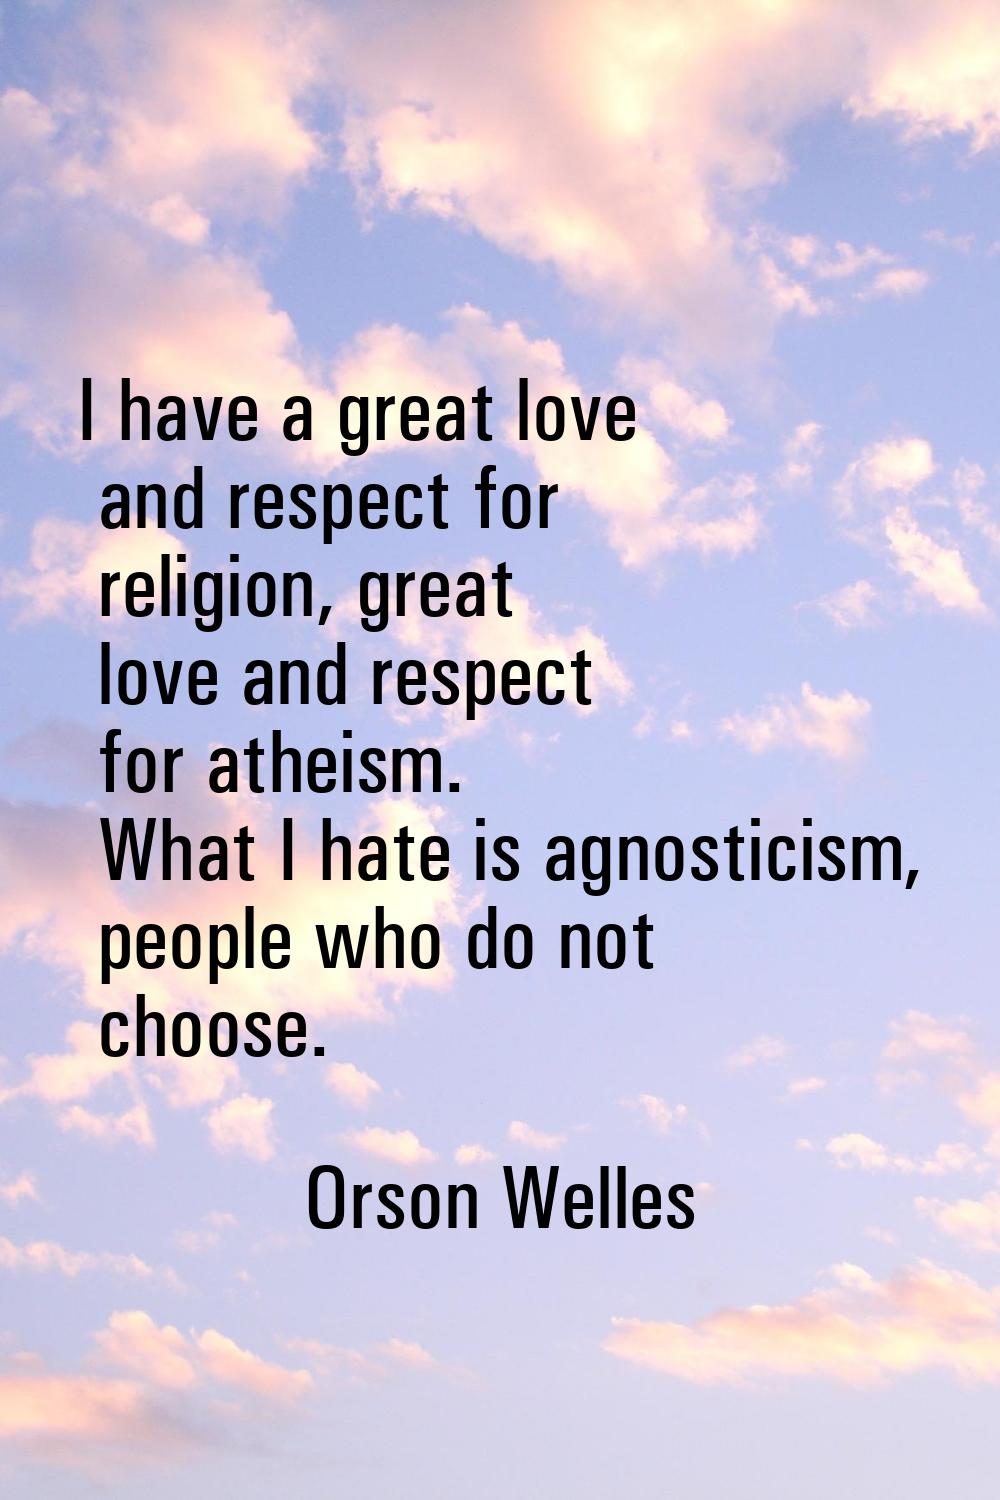 I have a great love and respect for religion, great love and respect for atheism. What I hate is ag